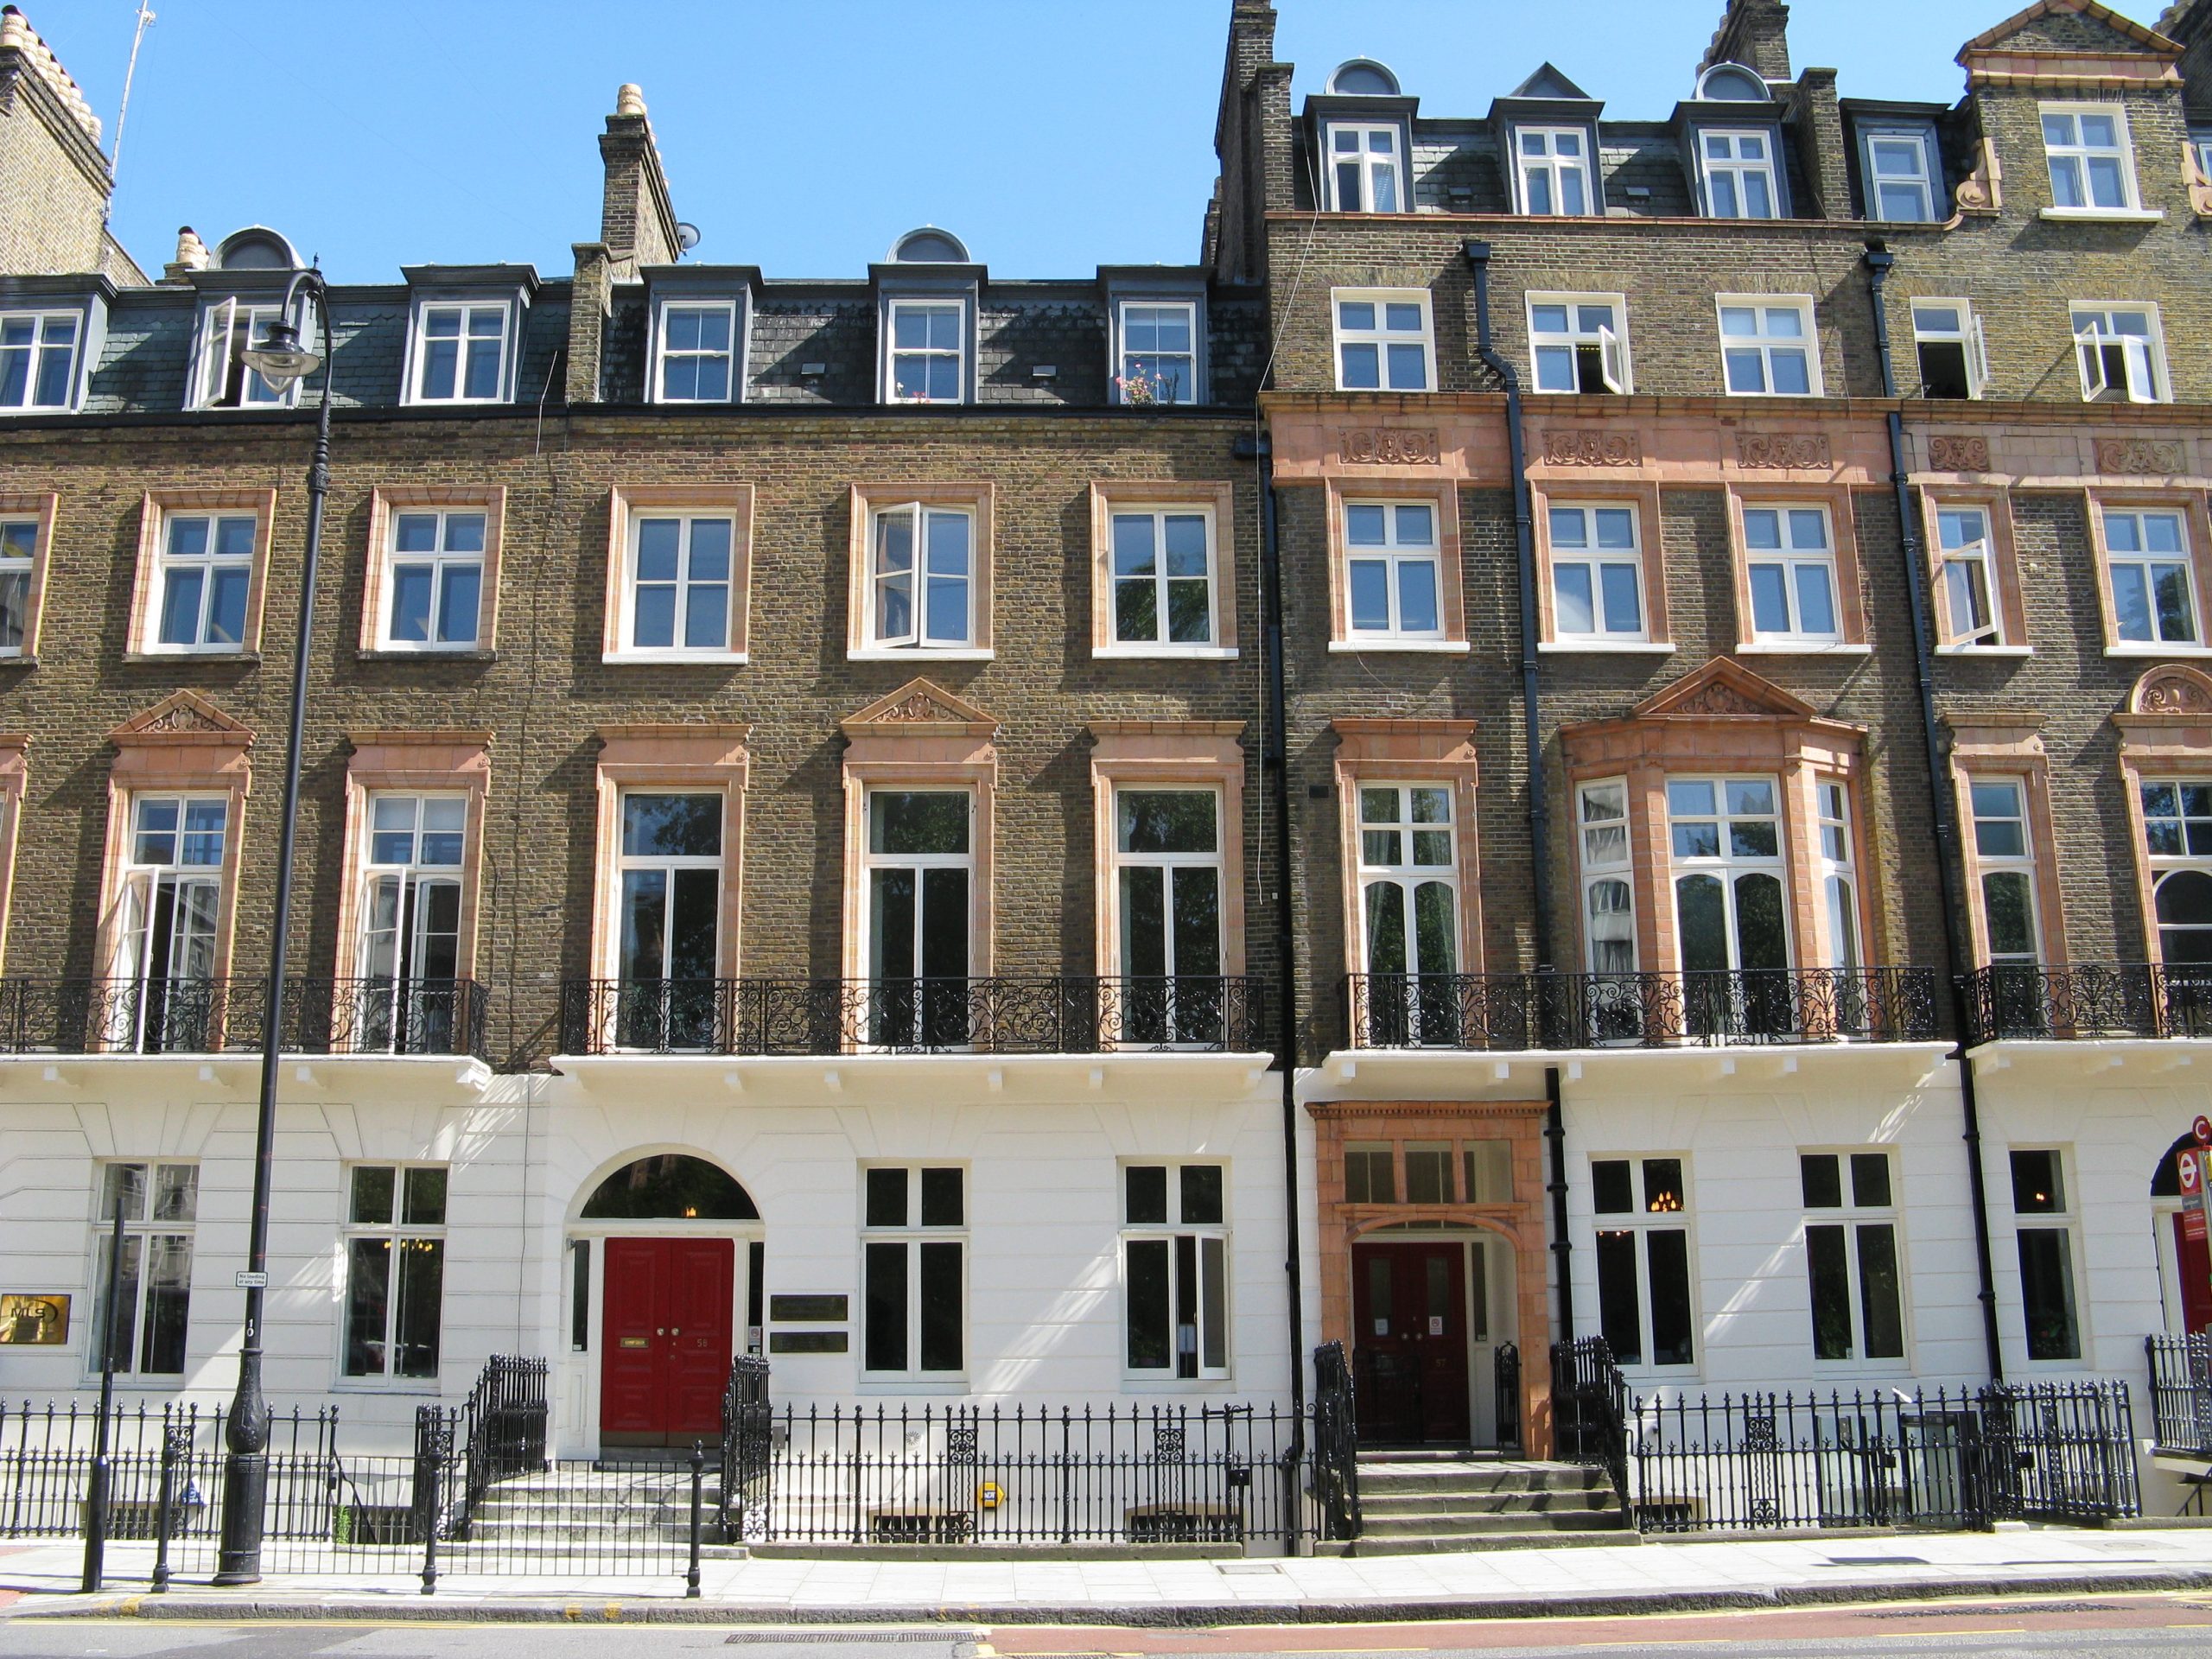 Photo of the exterior of terraced buildings in London